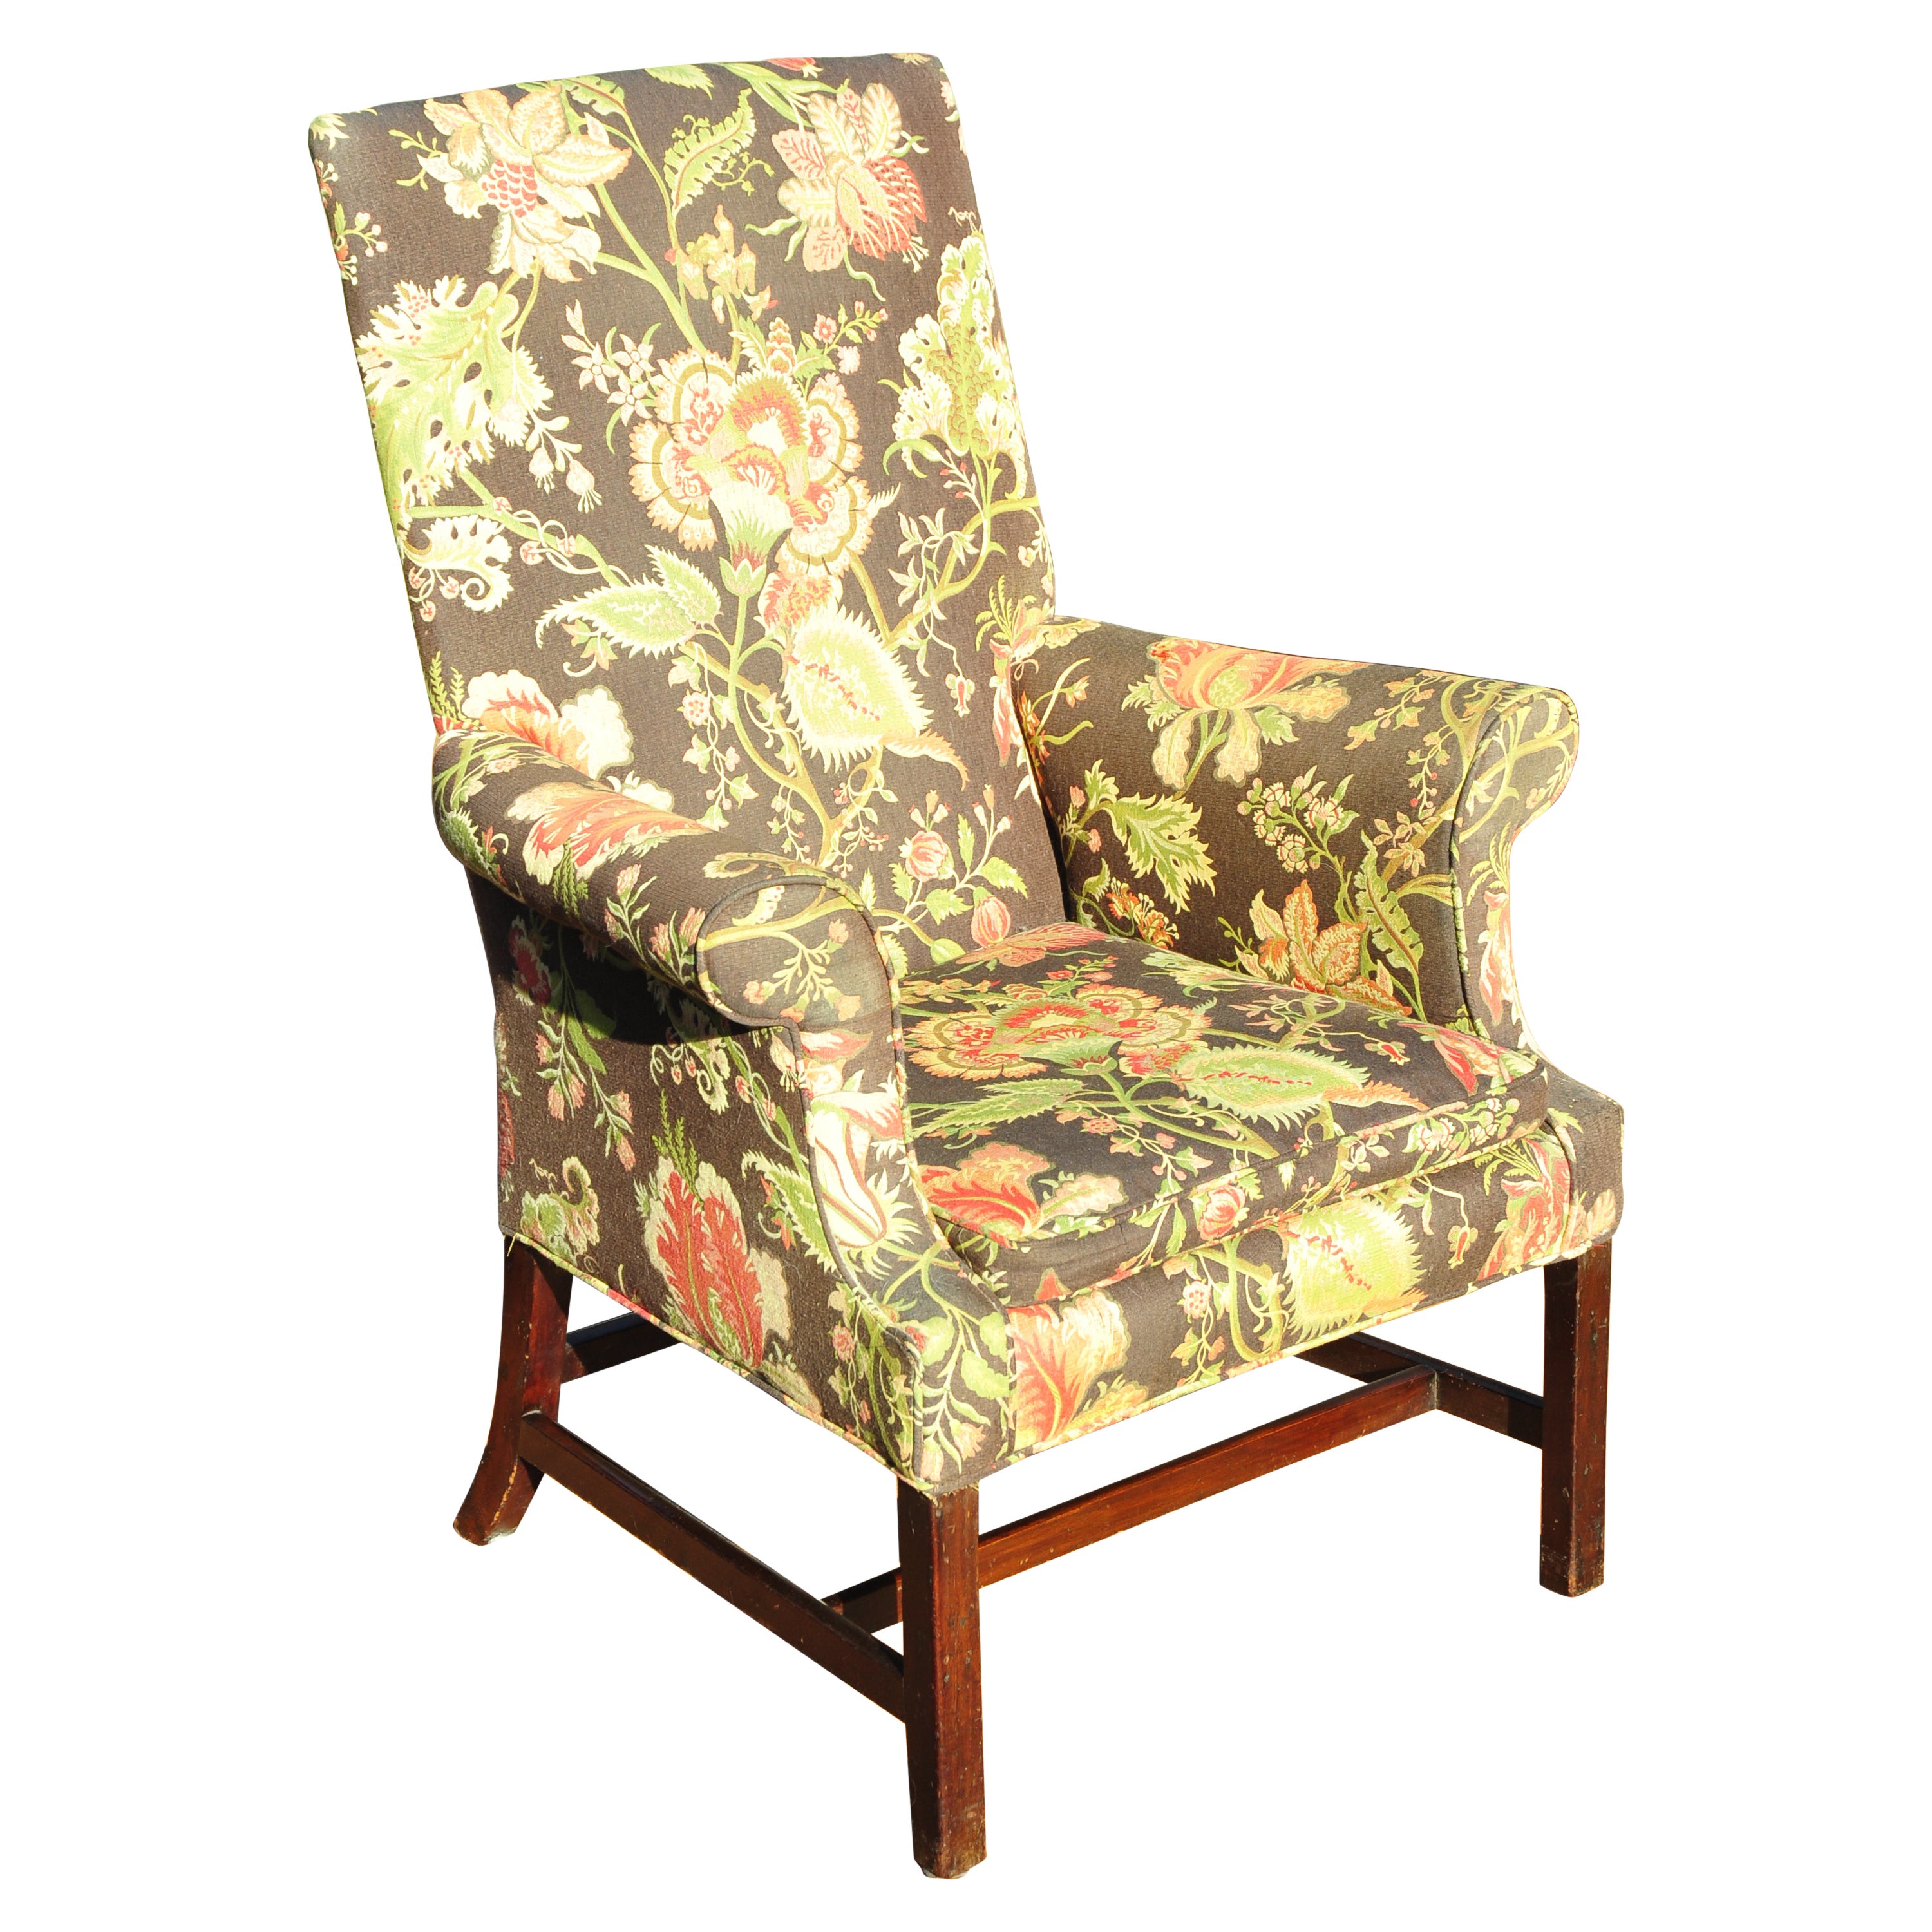 Rare Period English George III Chippendale Library Armchair Chair Circa 1790 For Sale